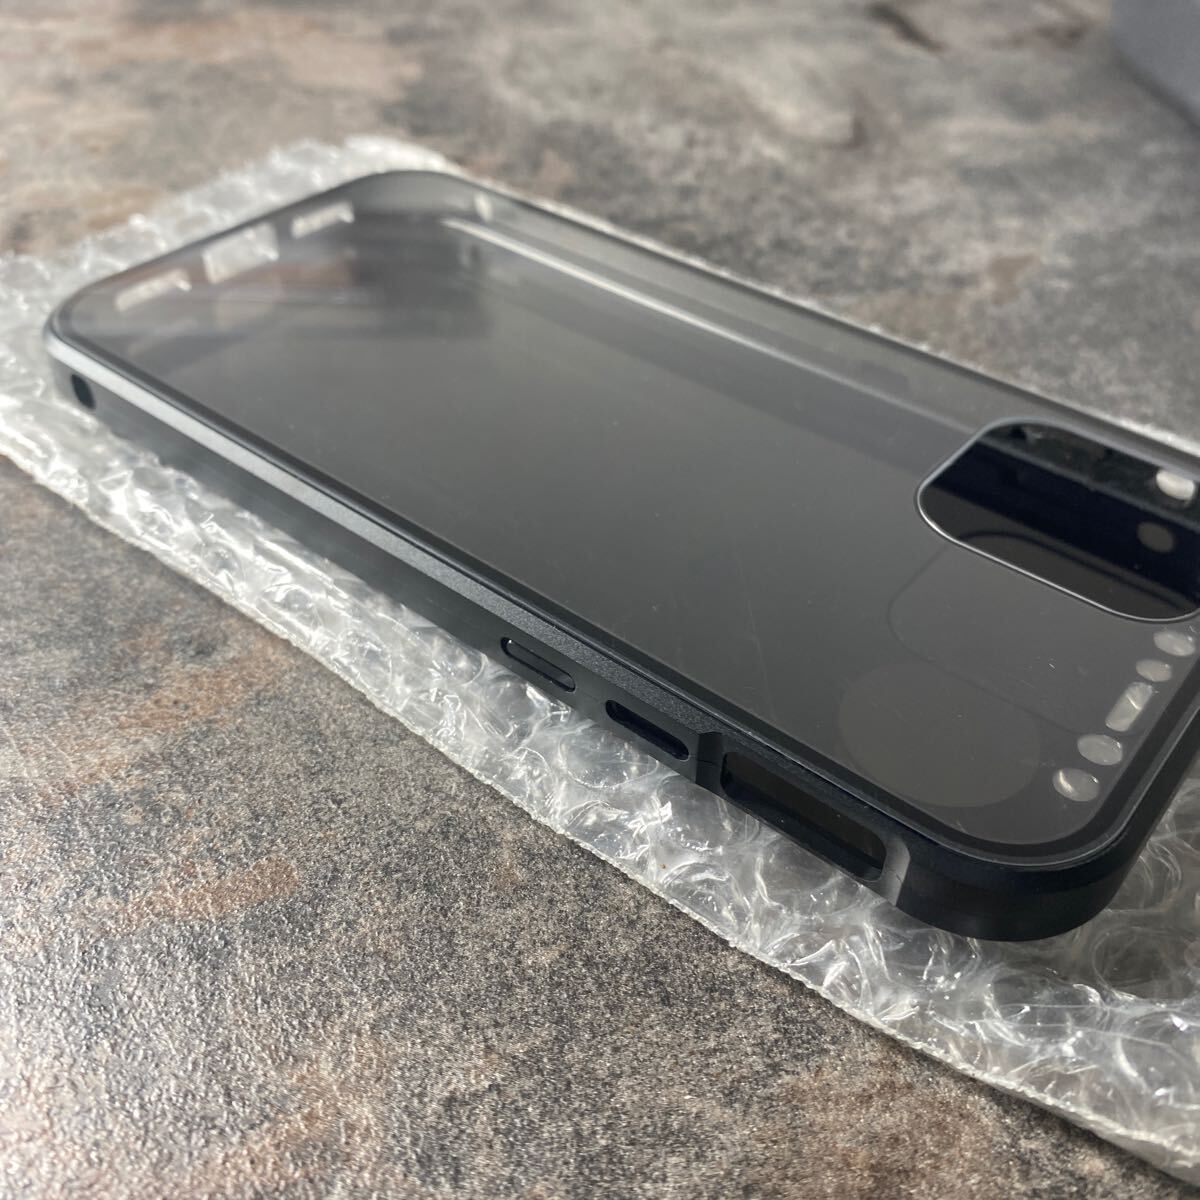 A4* case / cover aluminum van pa- clear transparent both sides rom and rear (before and after) glass magnet [ rom and rear (before and after) glass +.. see prevention ] ([ iPhone12 Pro ( black )])